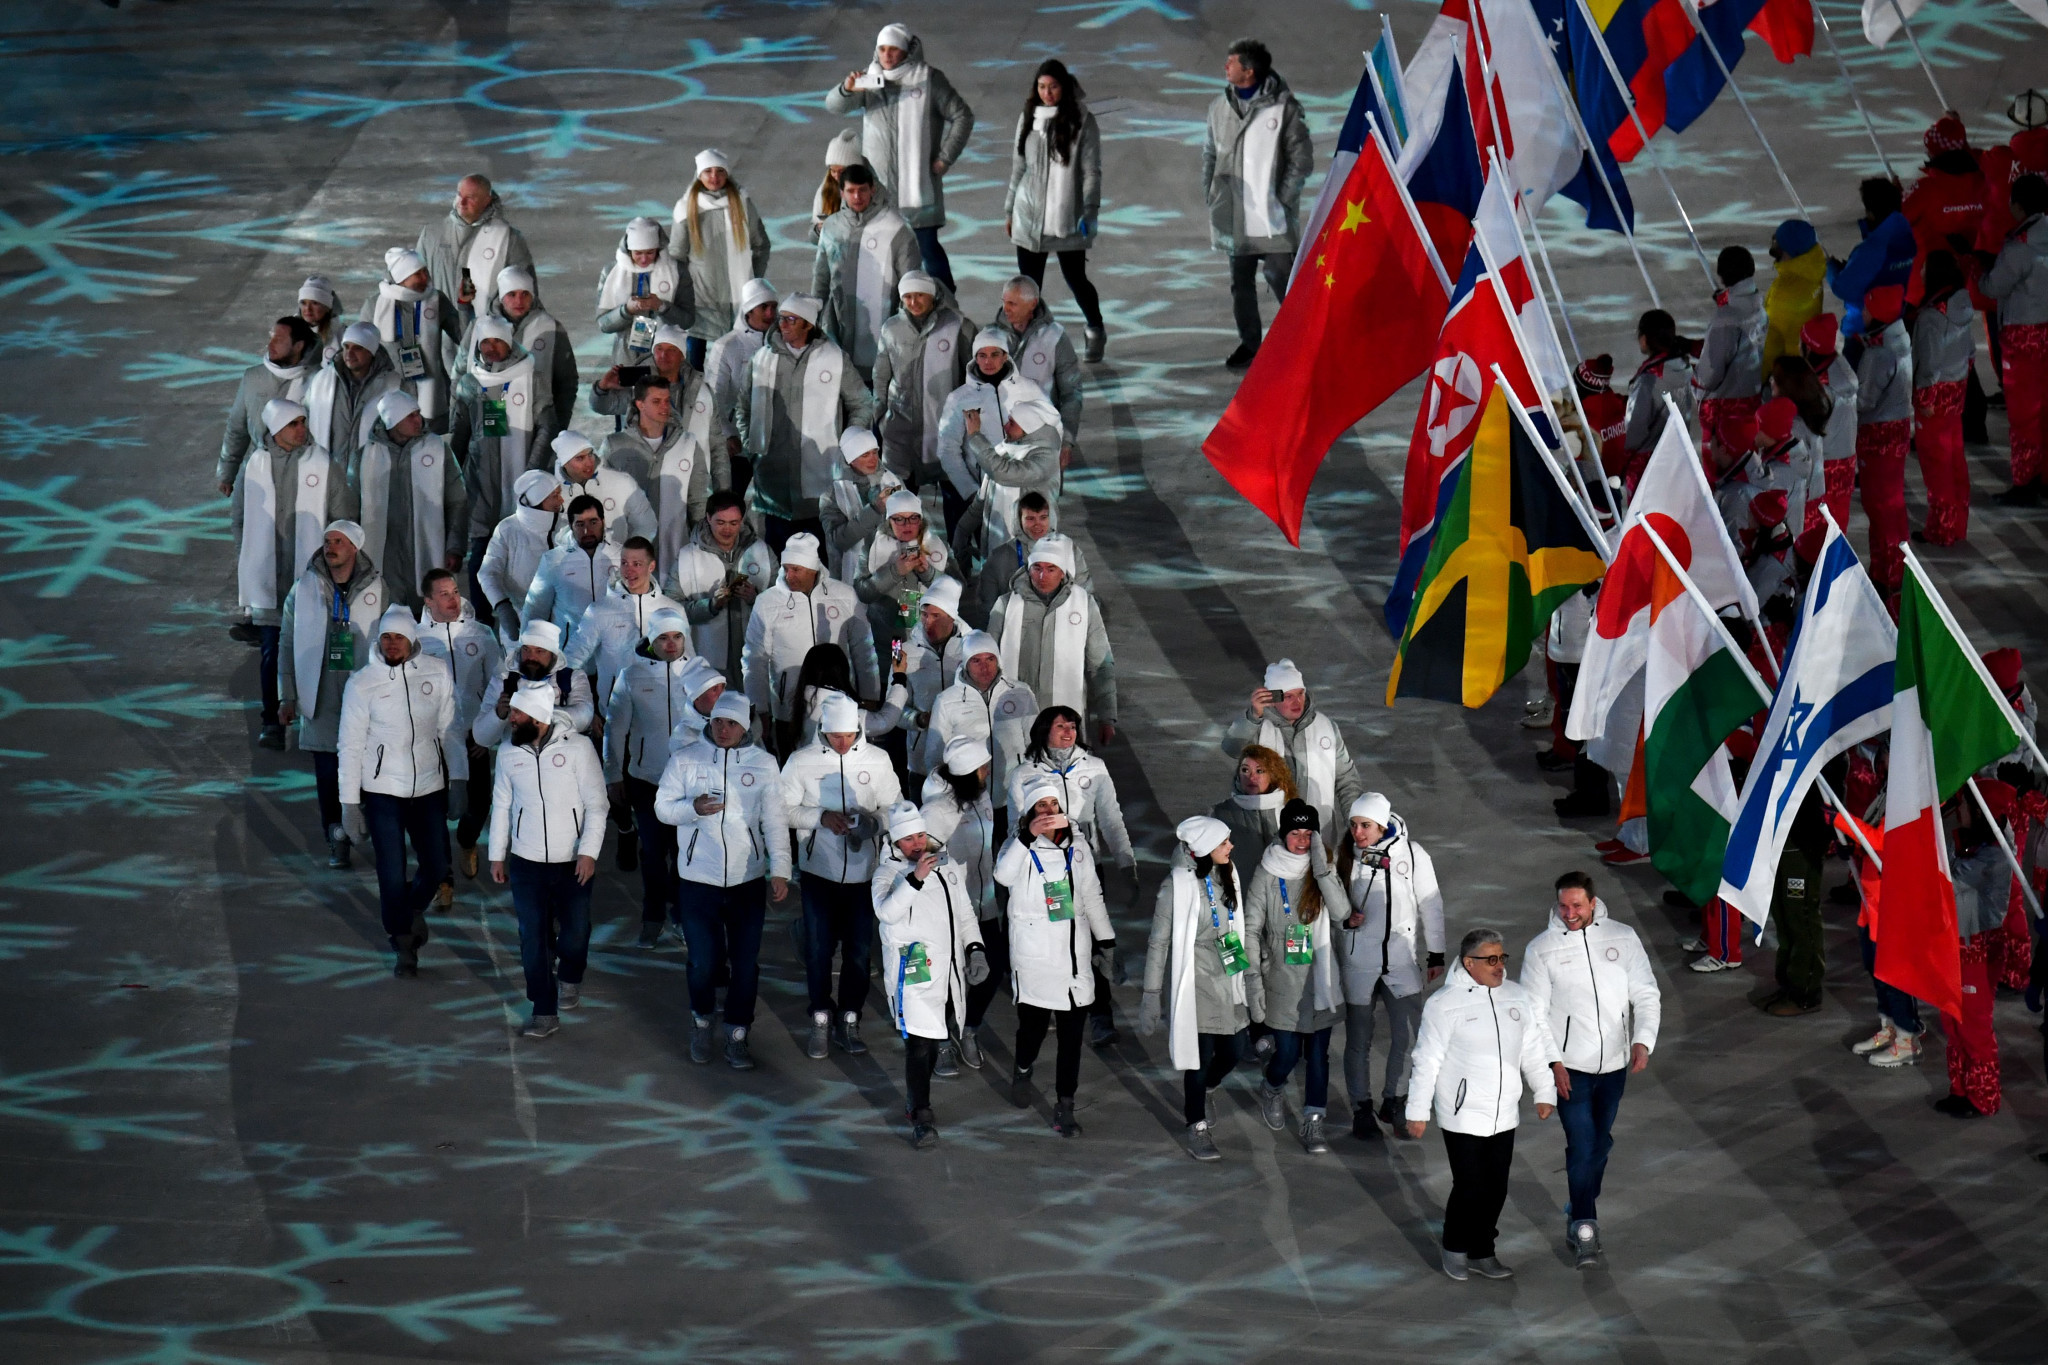 Russian athletes march at the Closing Ceremony under the Olympic flag, and the Olympic Athletes from Russia team name ©Getty Images